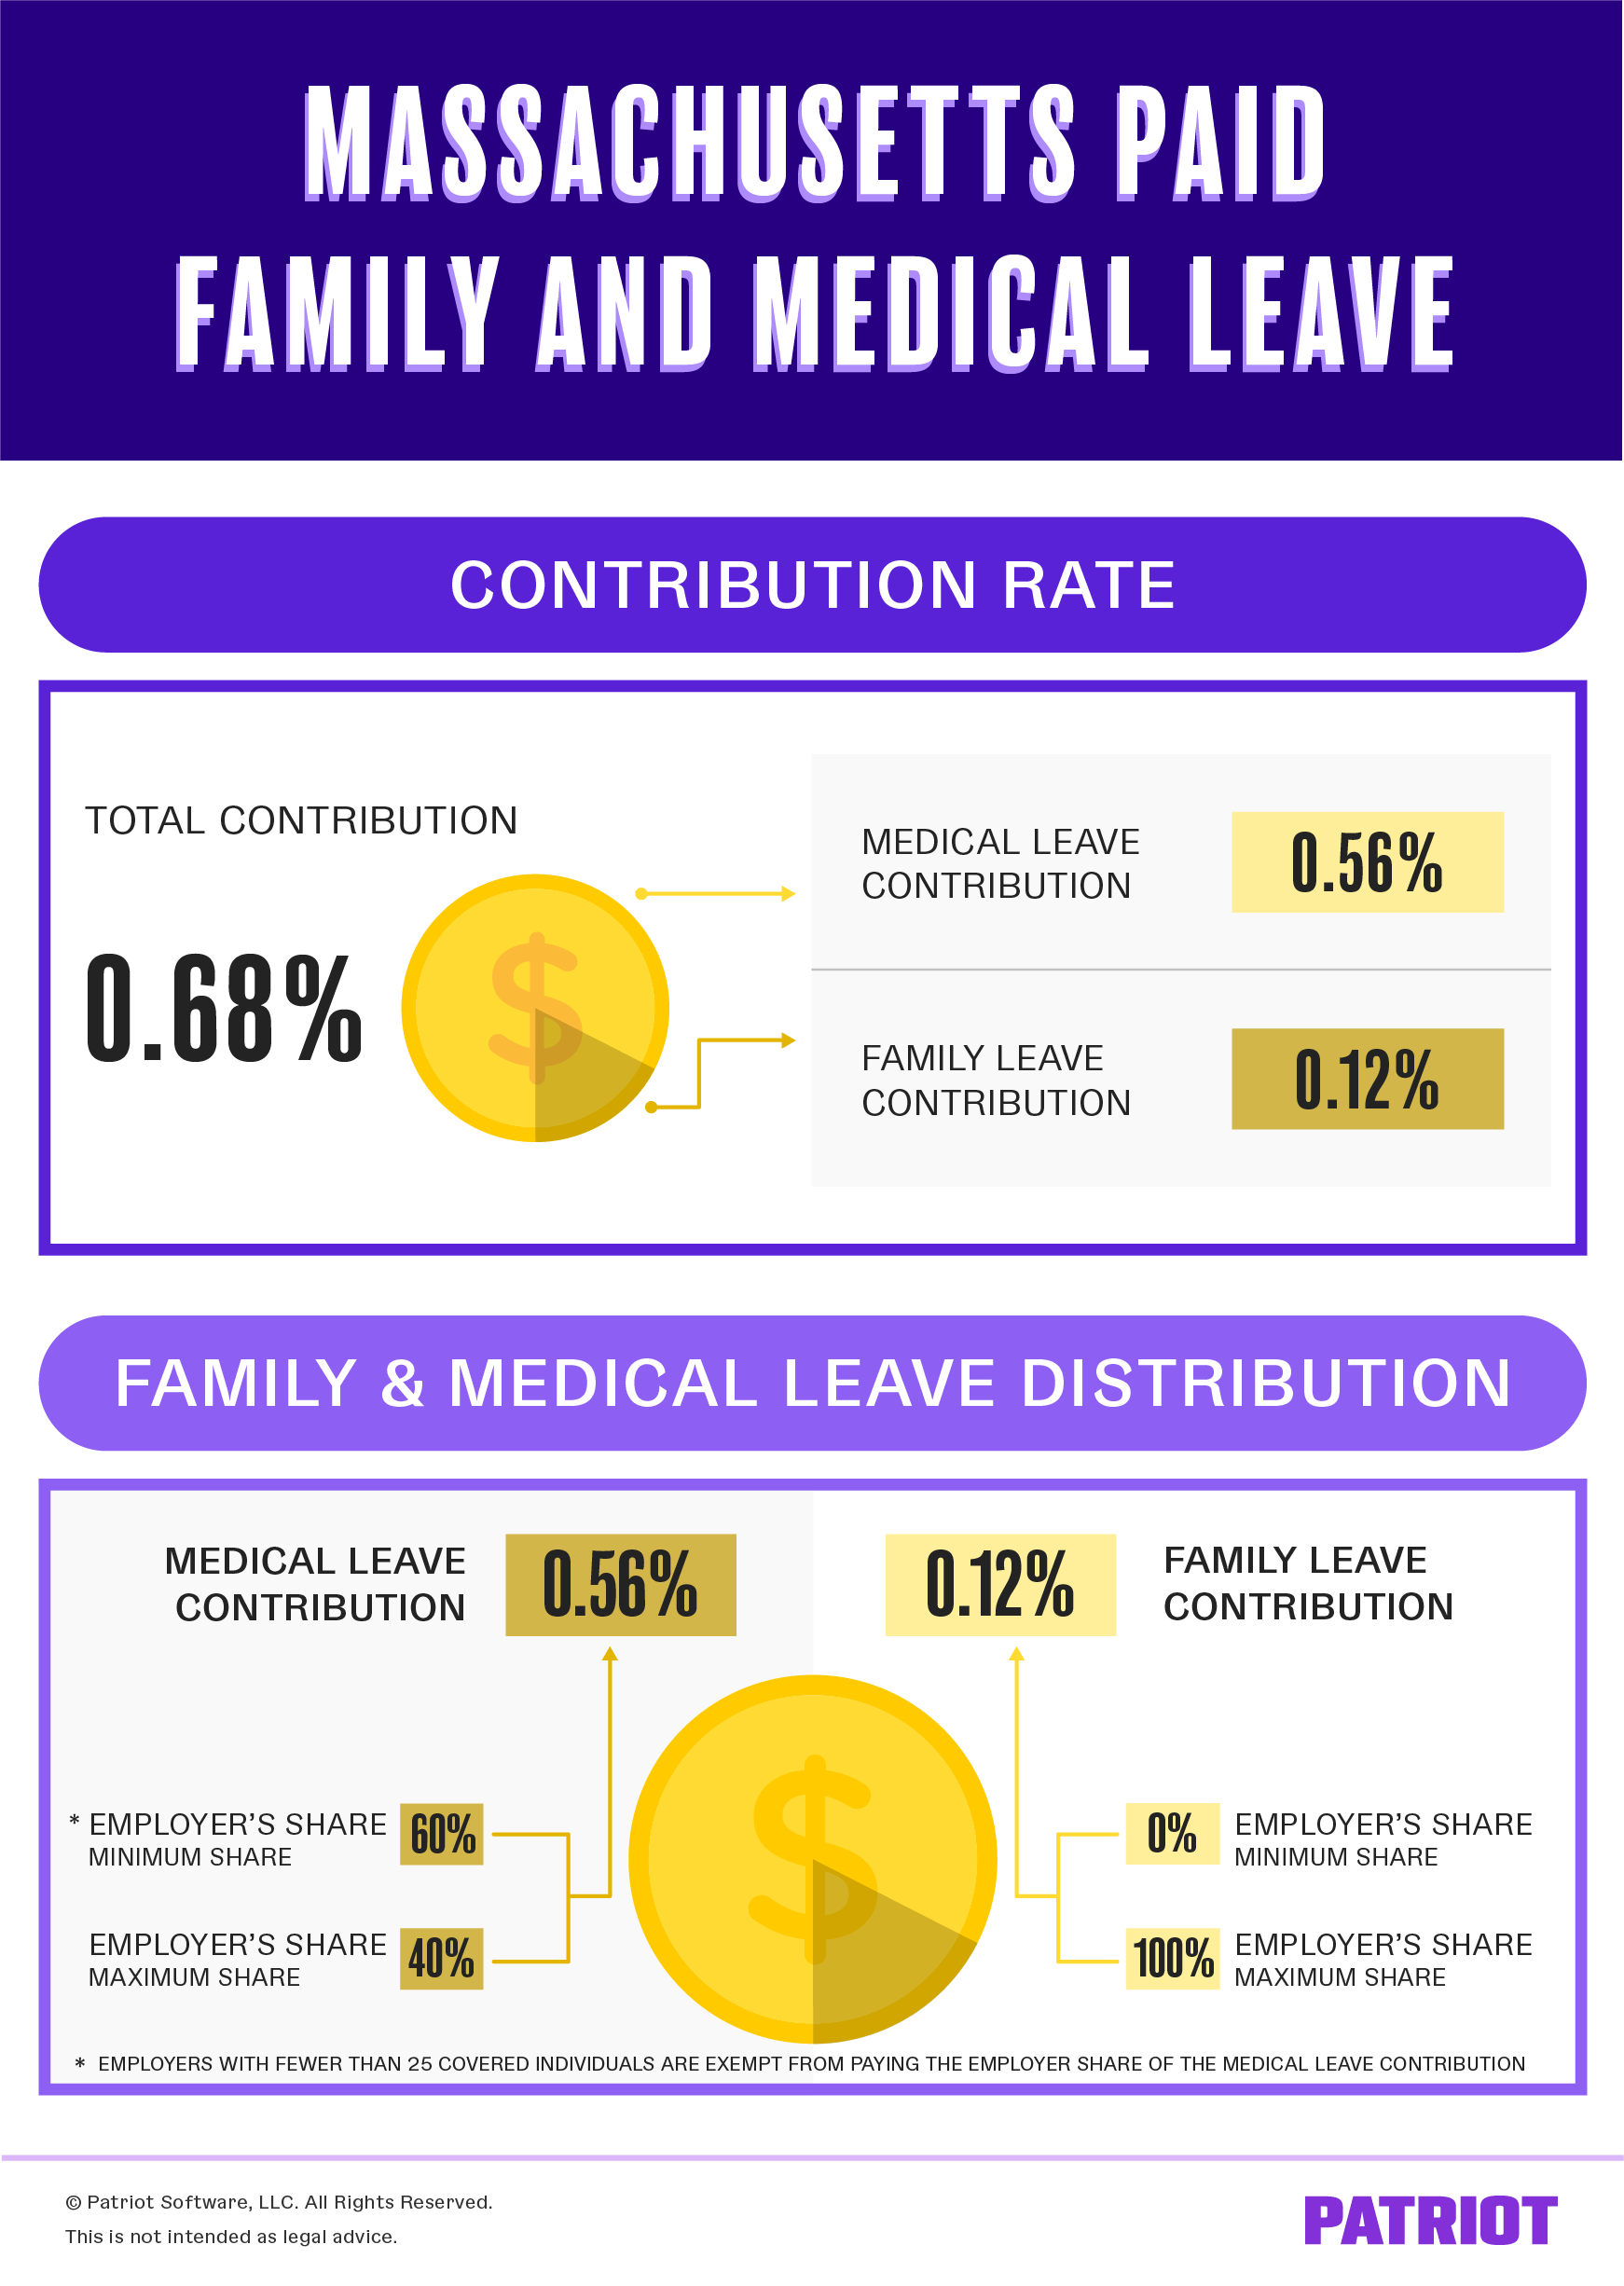 Massachusetts paid family and medical leave contribution rate breakdown 